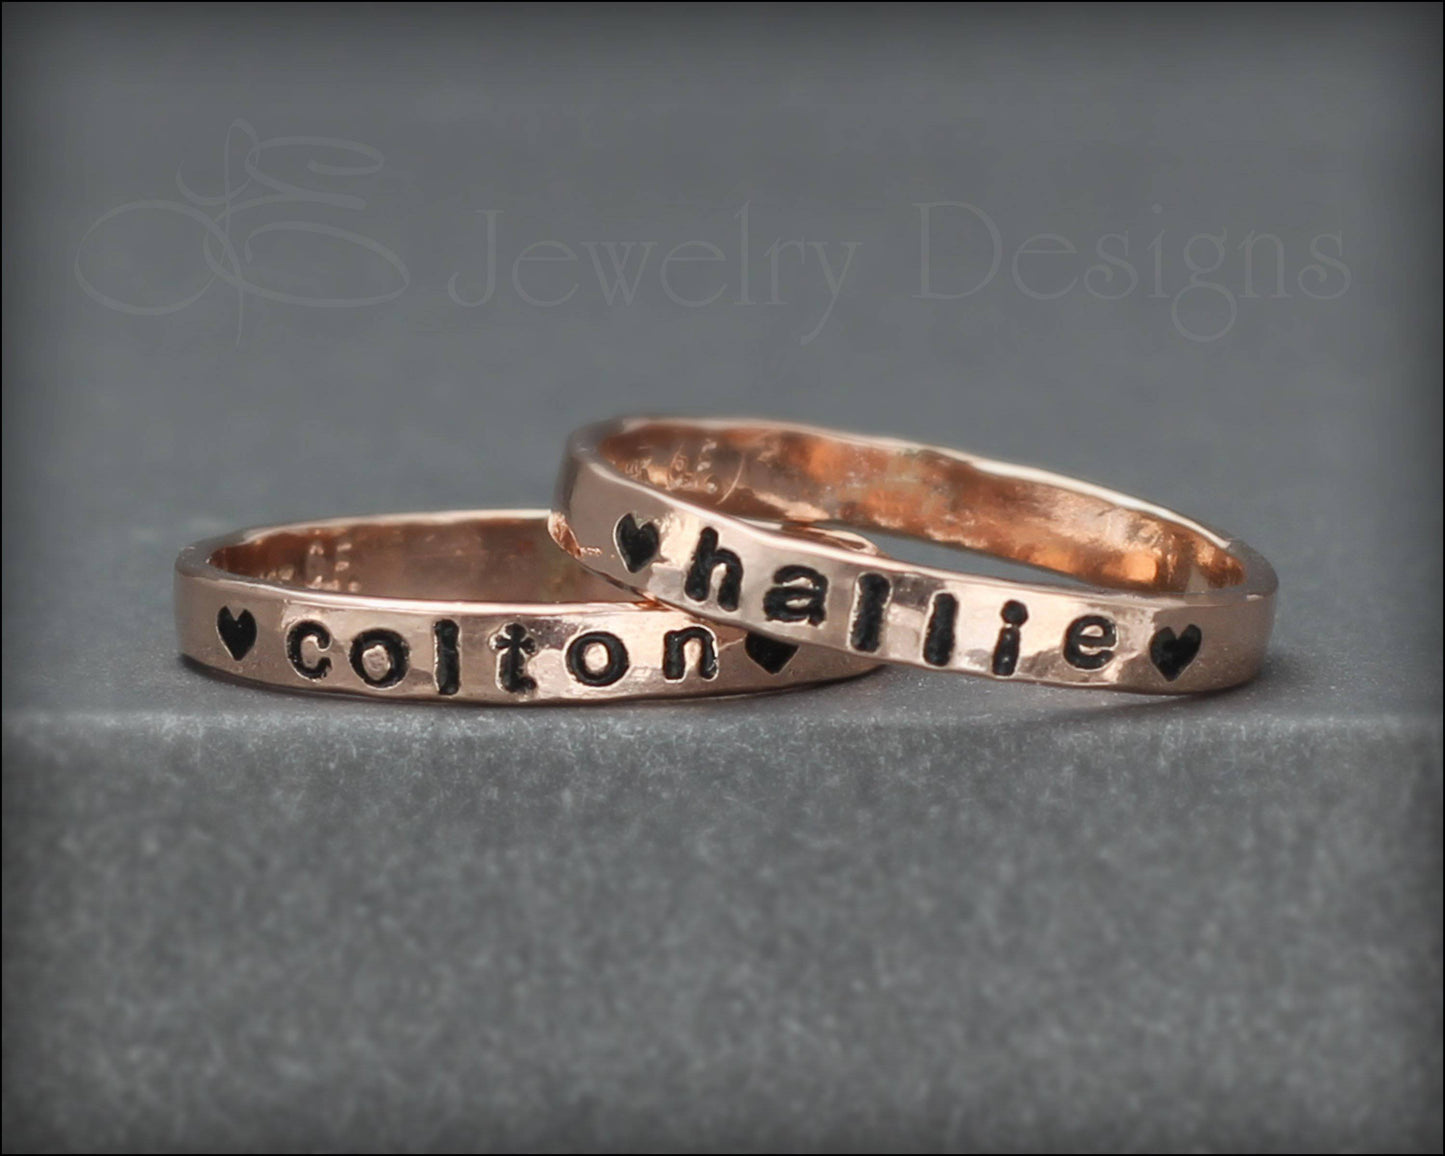 Hand Stamped Stacking Ring - LE Jewelry Designs